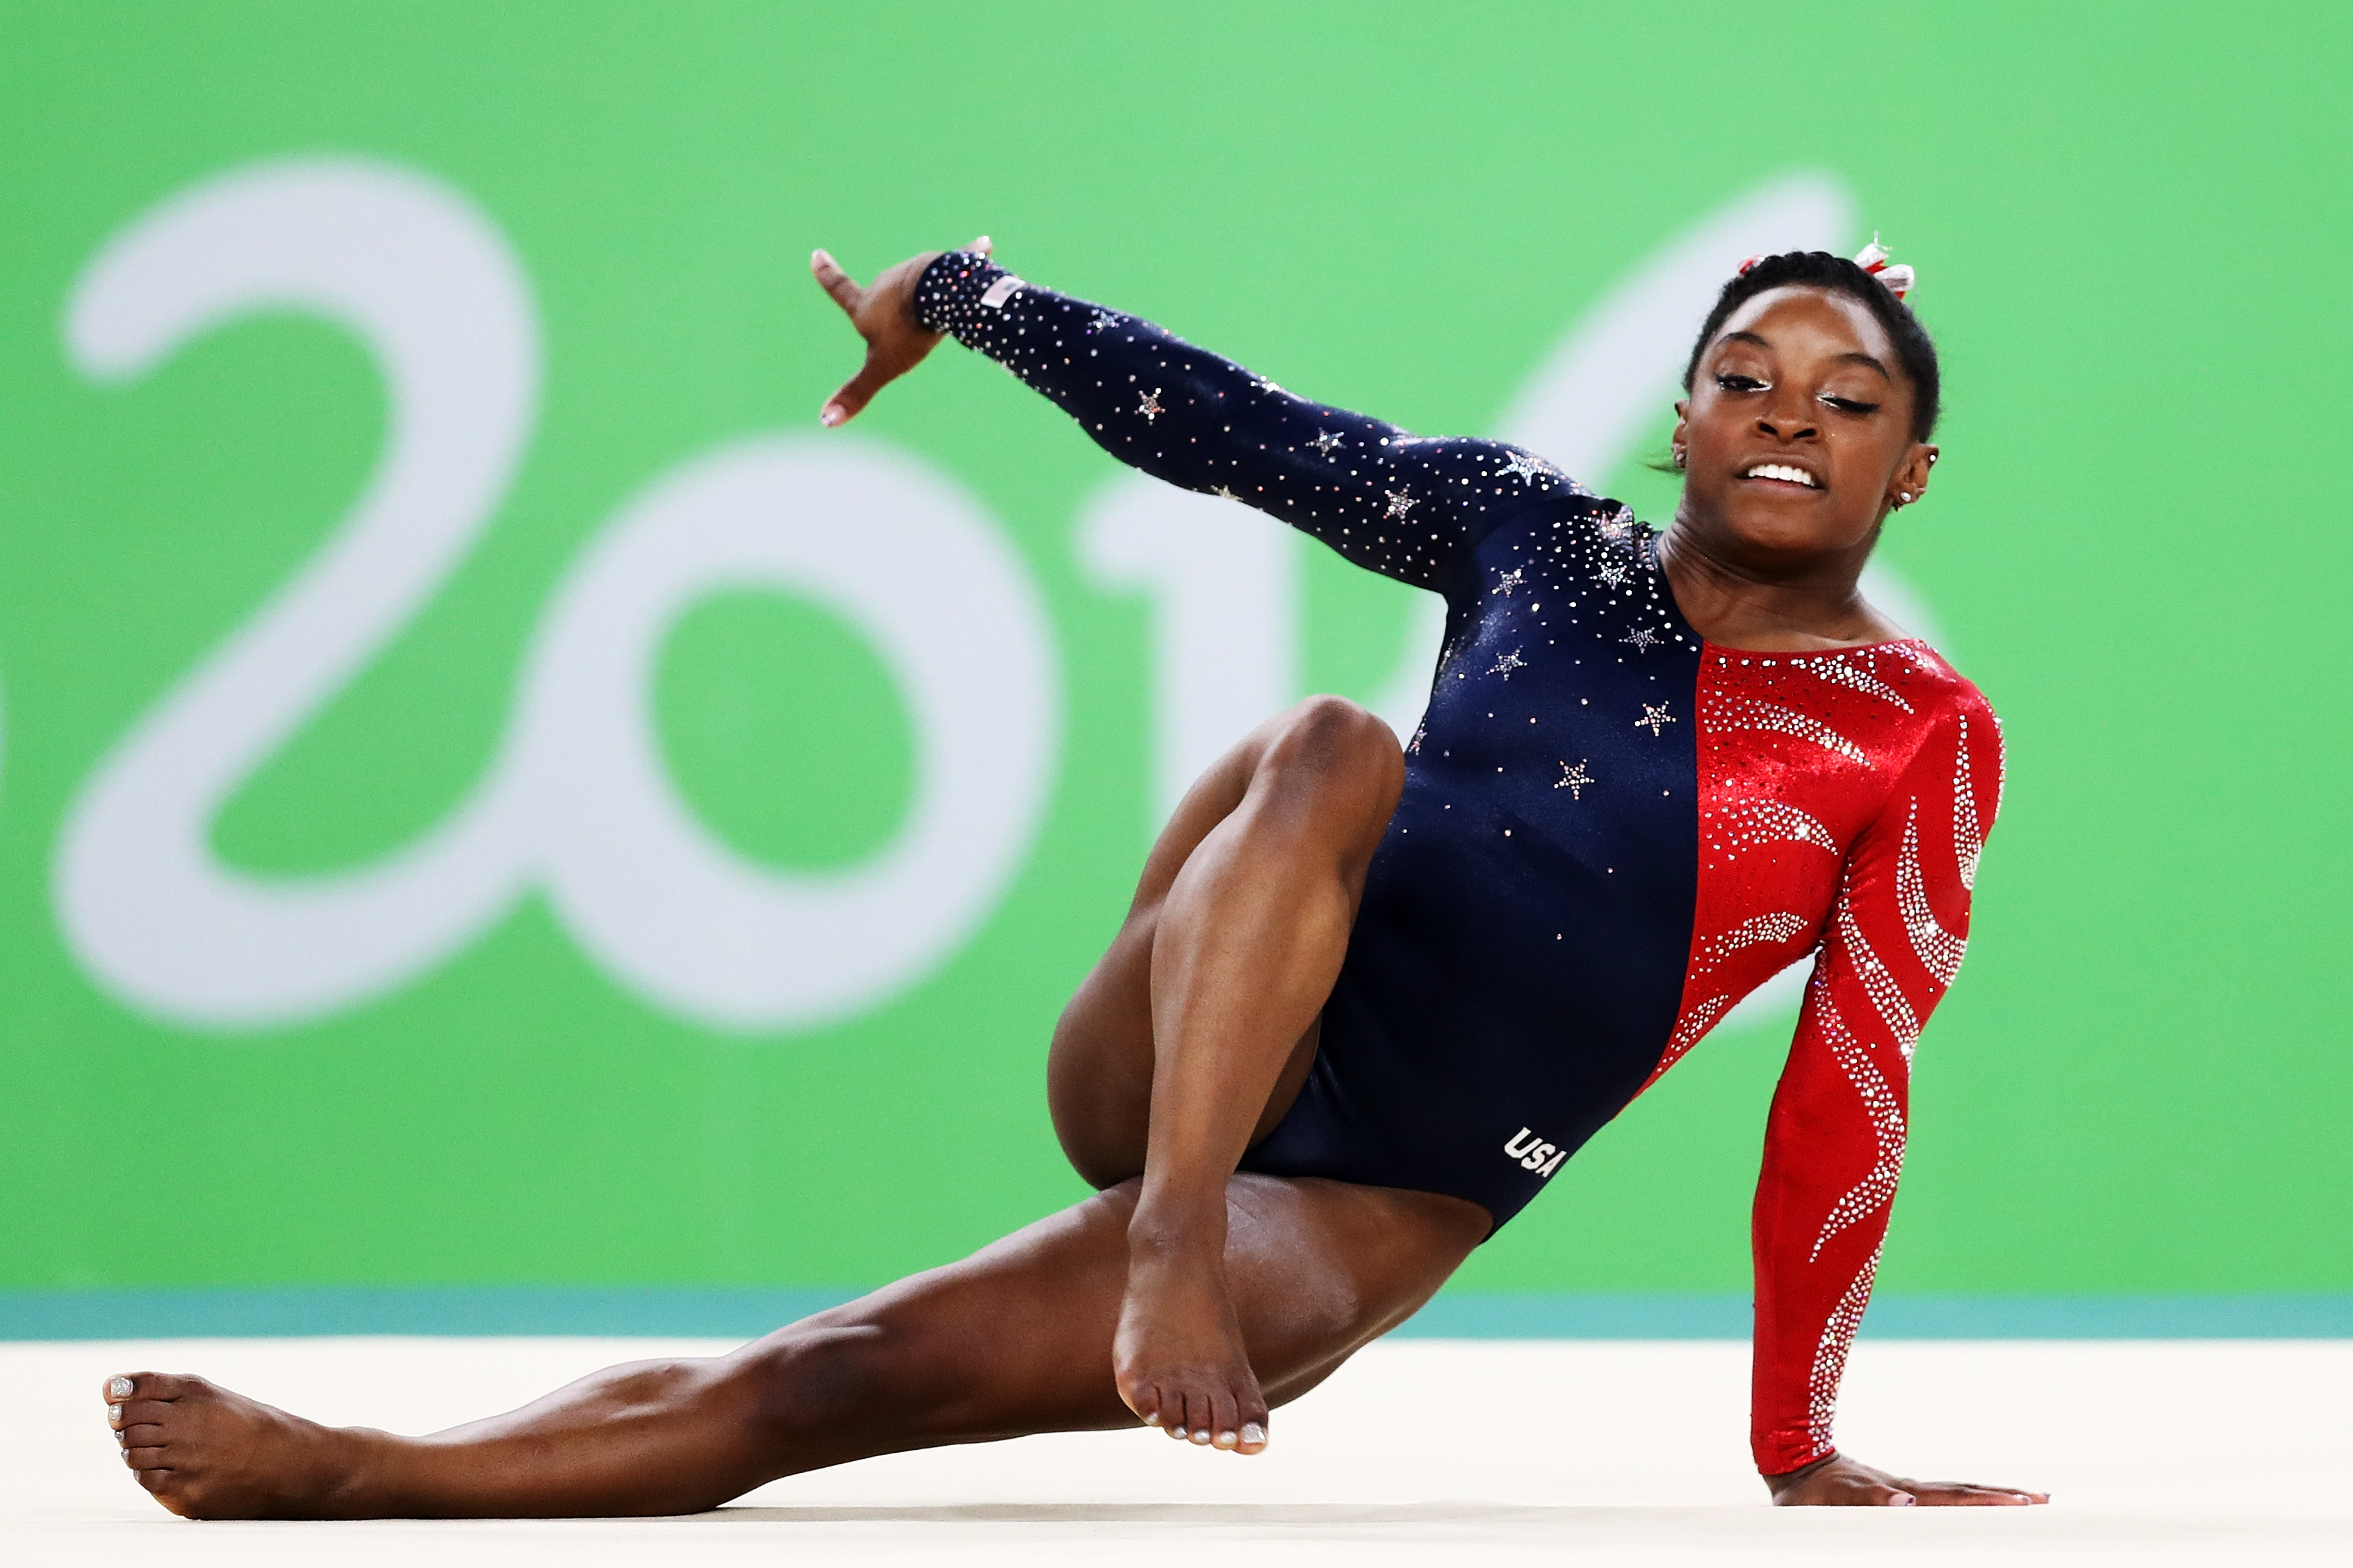 Simone Biles Becomes Most Decorated Female Gymnast In History The.